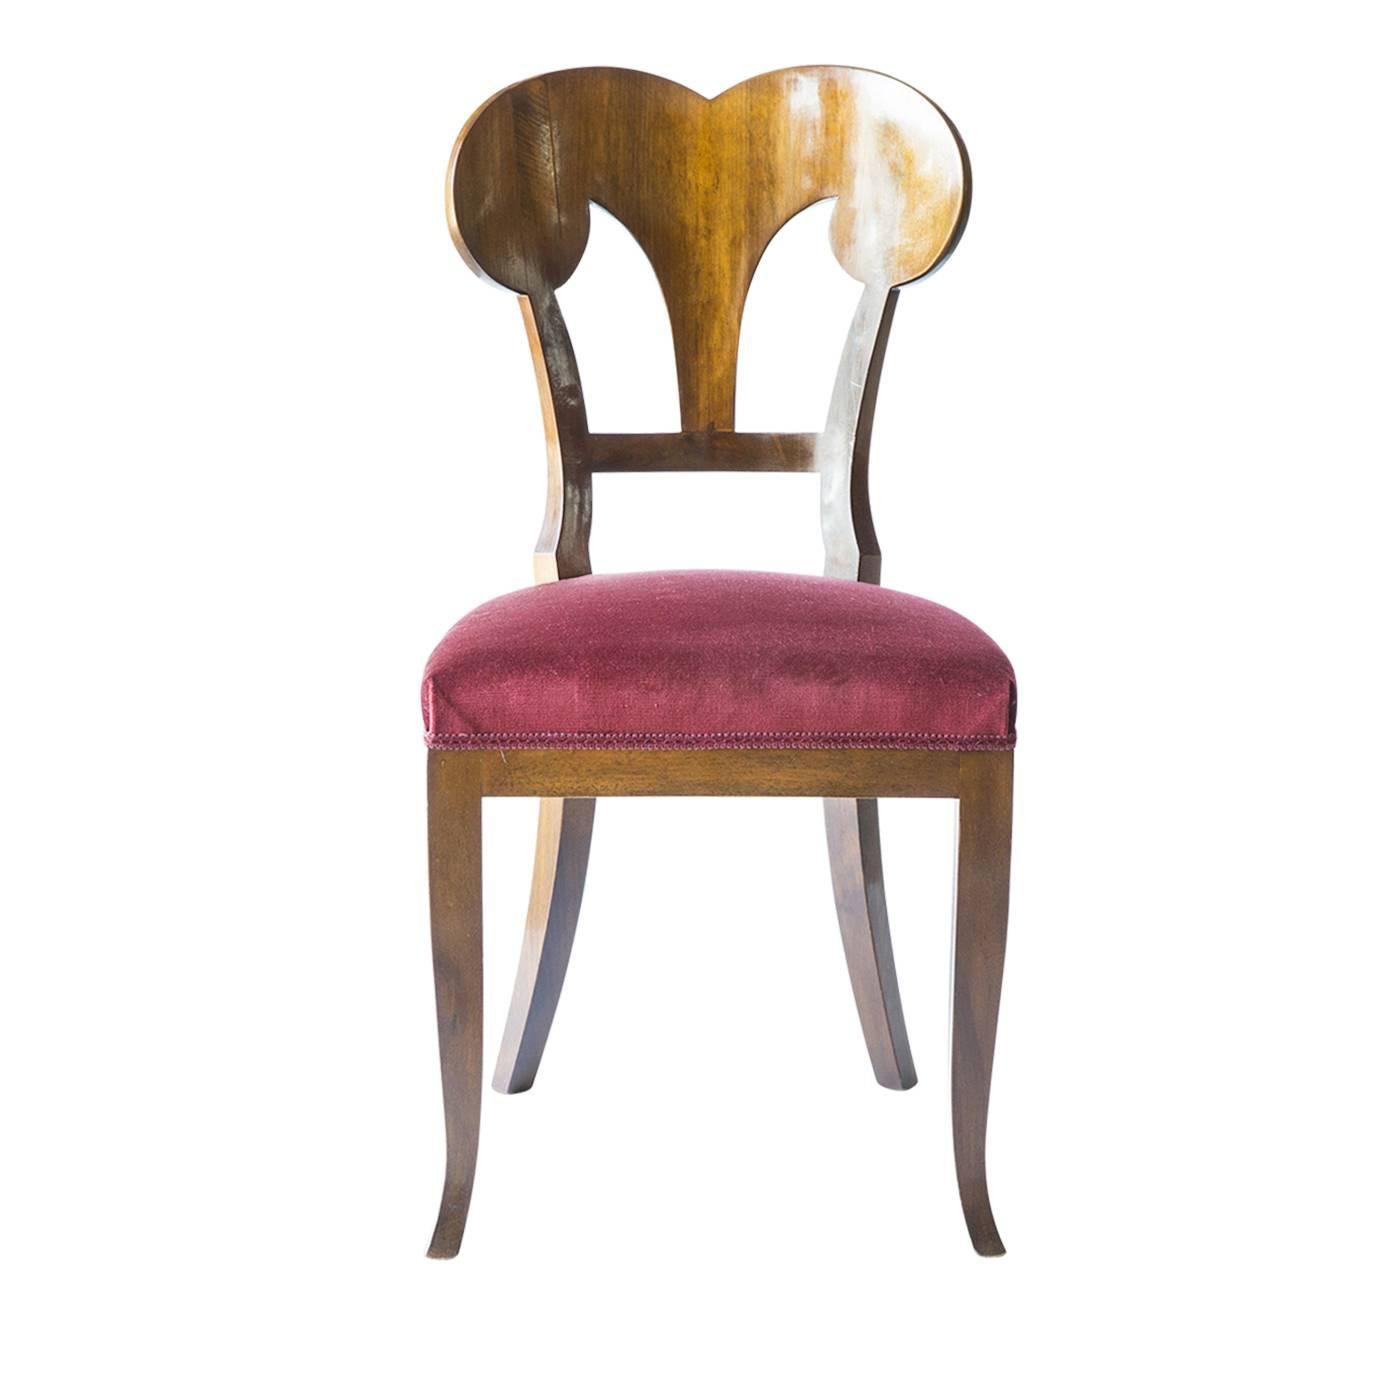 Set of four dignified Biedermeier seats executed with a wine-colored velvet tapestry for the seat. The structure is in solid walnut wood, while the color of the veneering is in a medium shade of walnut. The foam rubber padding is in non-deformable